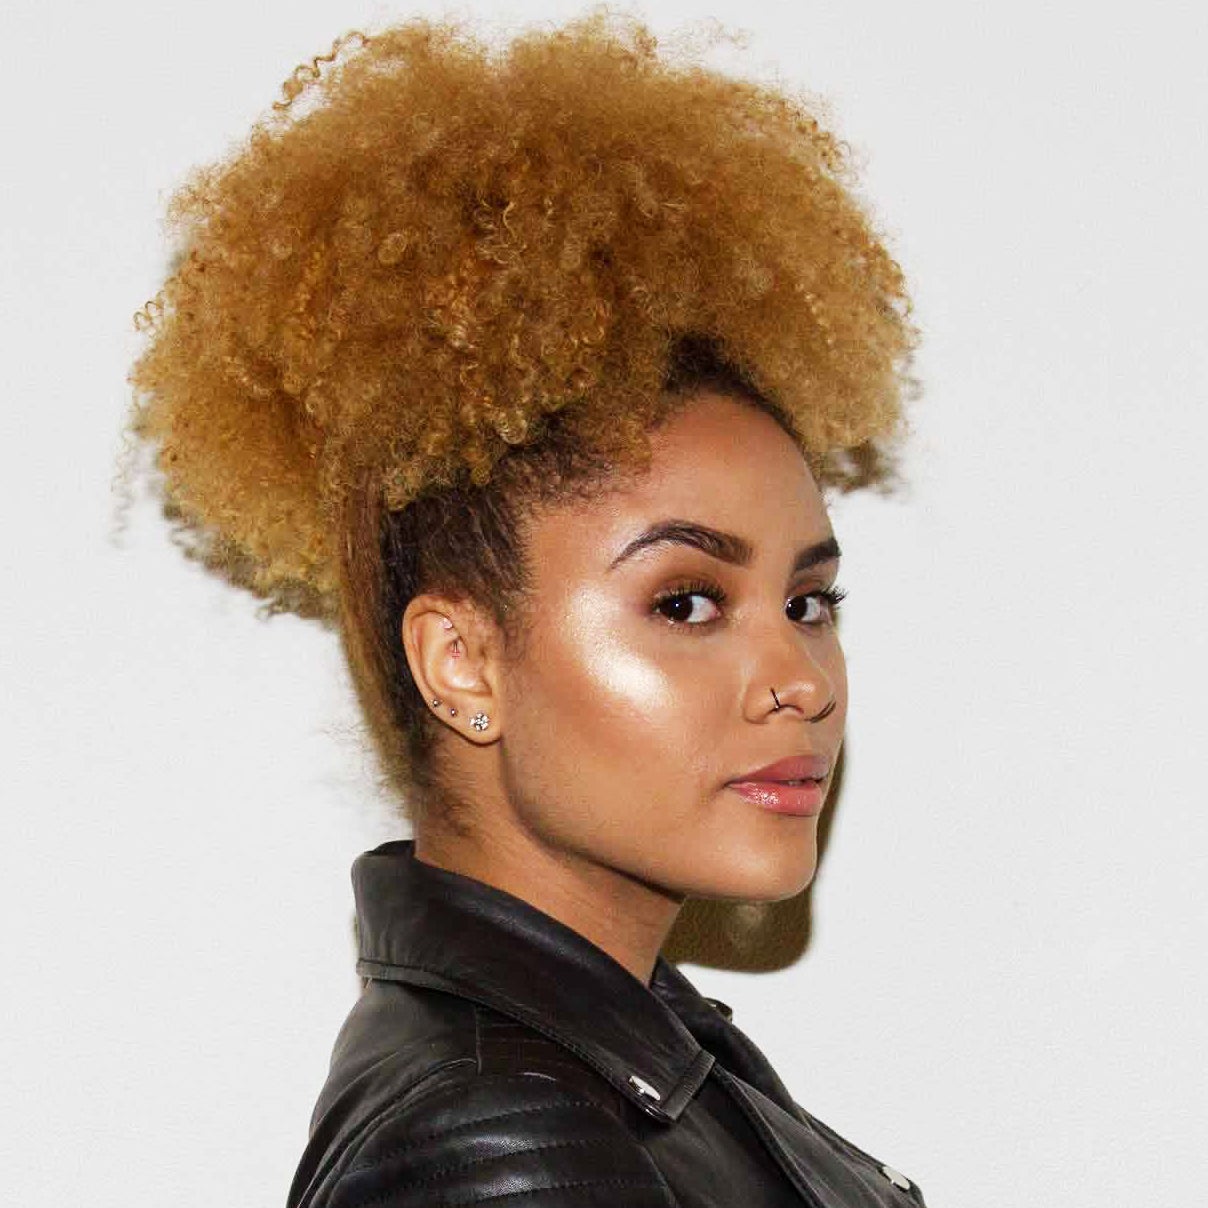 The Best Black Hairstyles at The Makeup Show NYC
